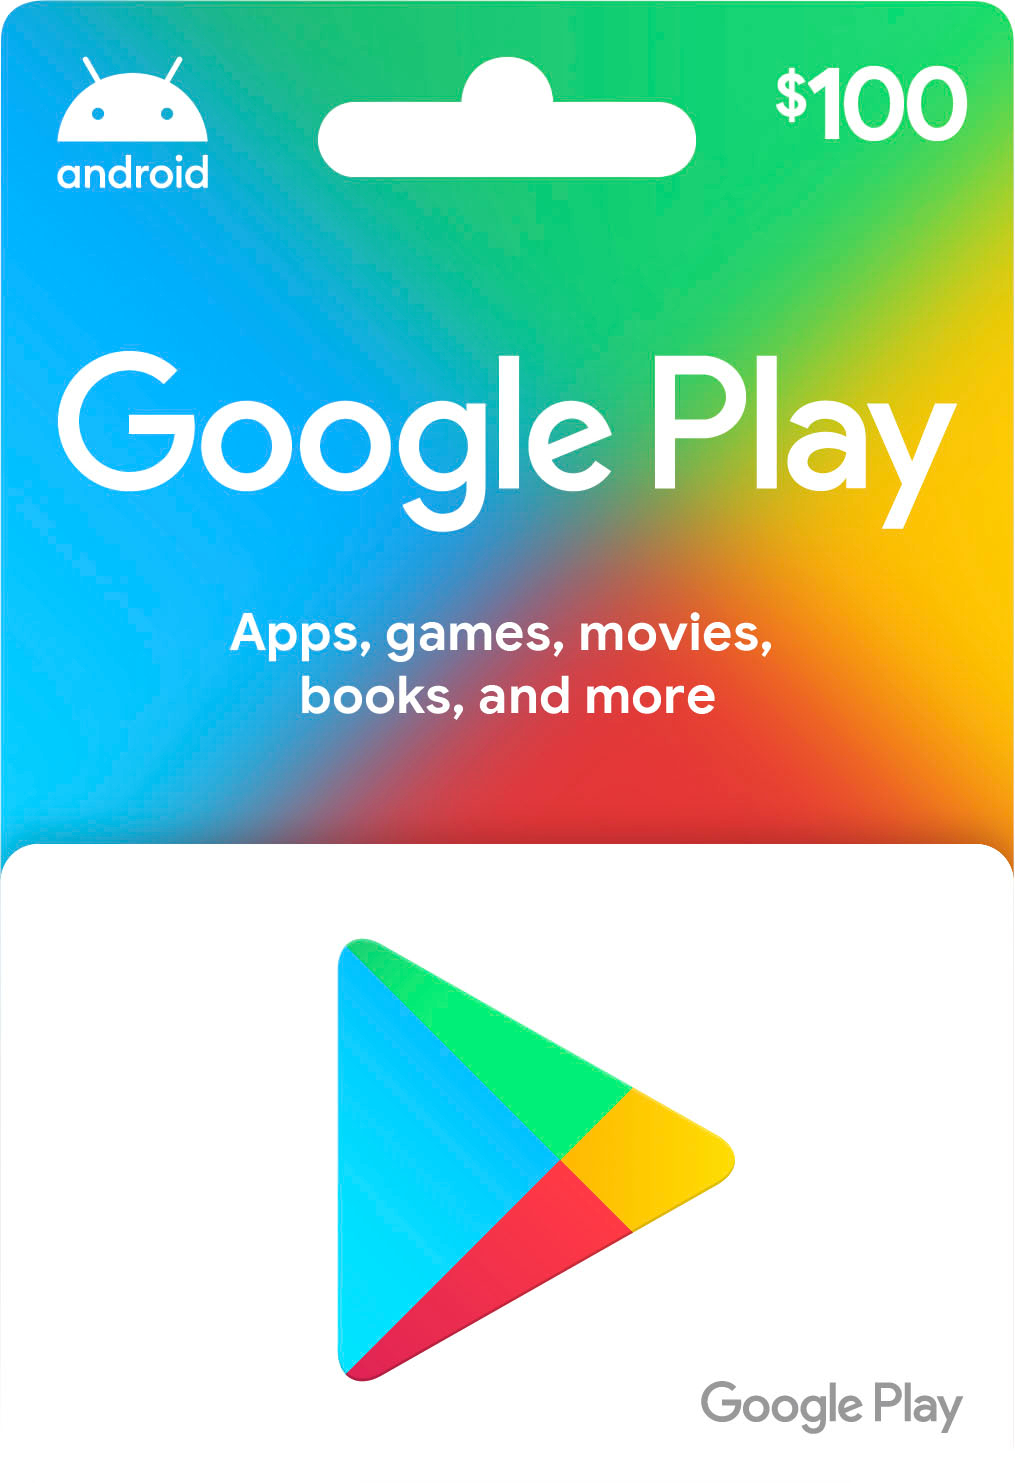 How Much is $100 Google Play Gift Card in Naira?